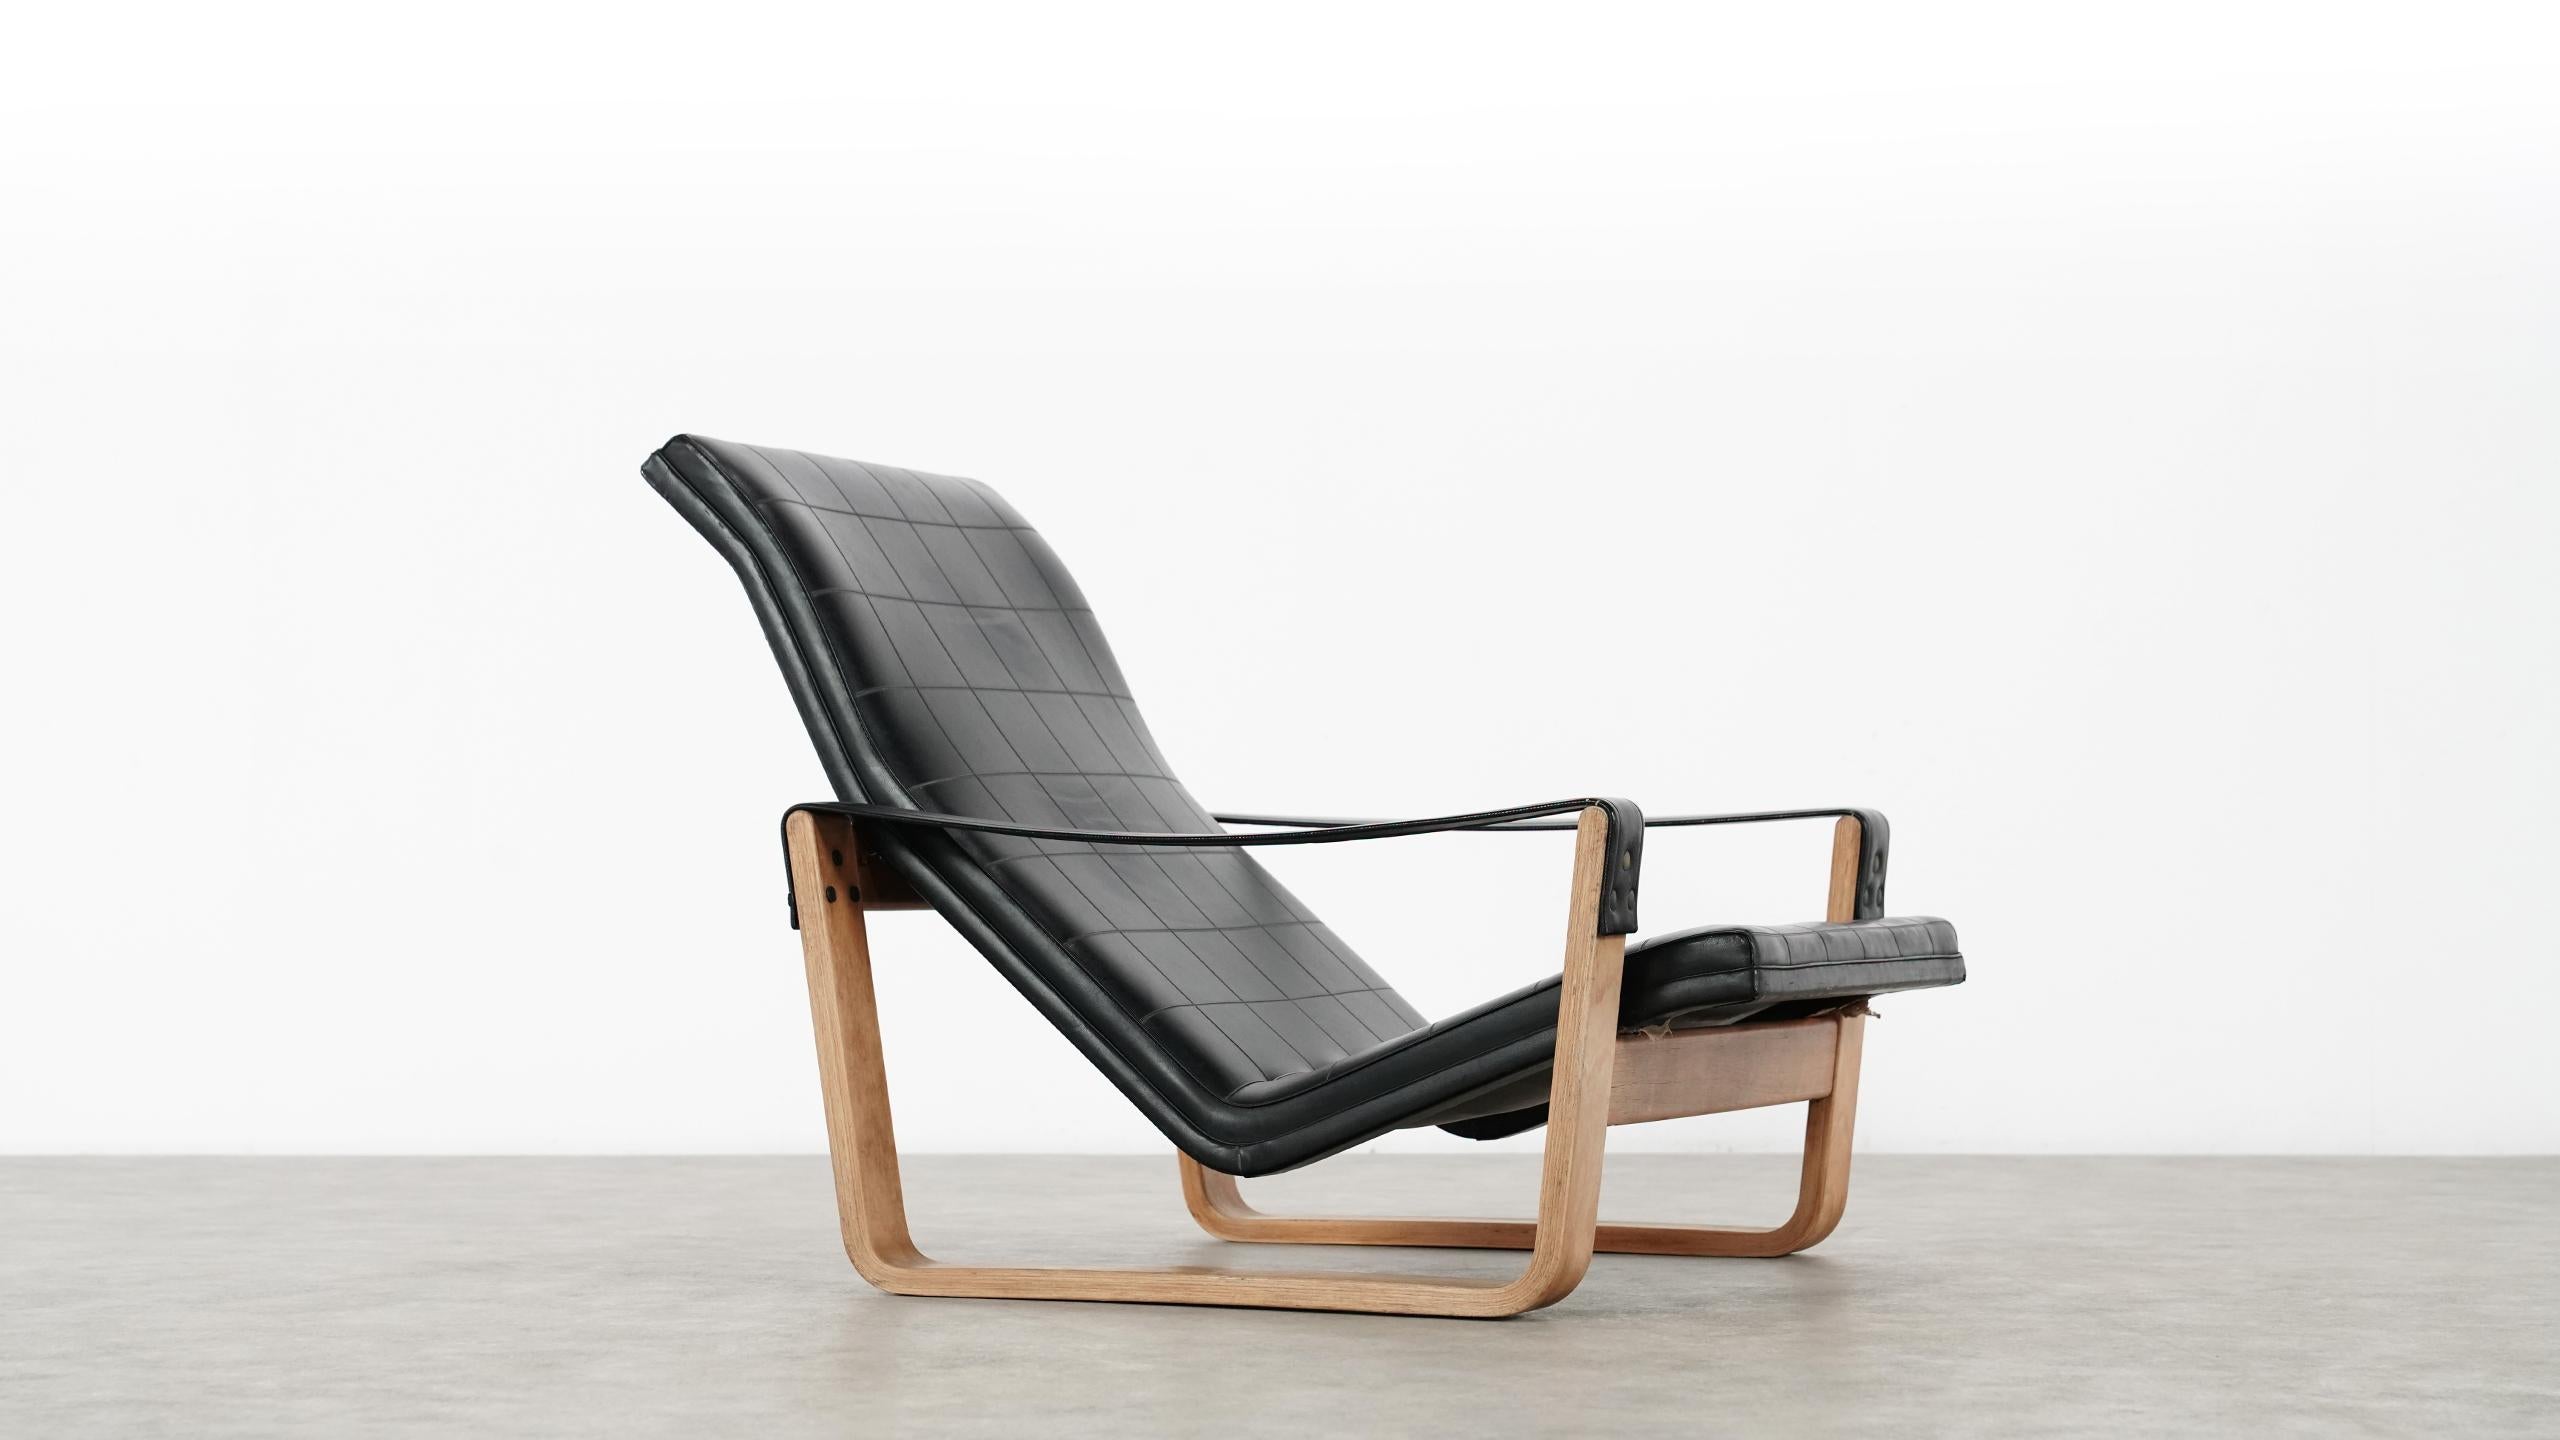 Lounge chair senior Pullka designed by Finnish designer Ilmari Lappalainen in 1967 for Asko, Finland.

It is composed of a base and armrests in black skai-leather resting on a structure in bent laminated birch.
The seat and the wooden base are